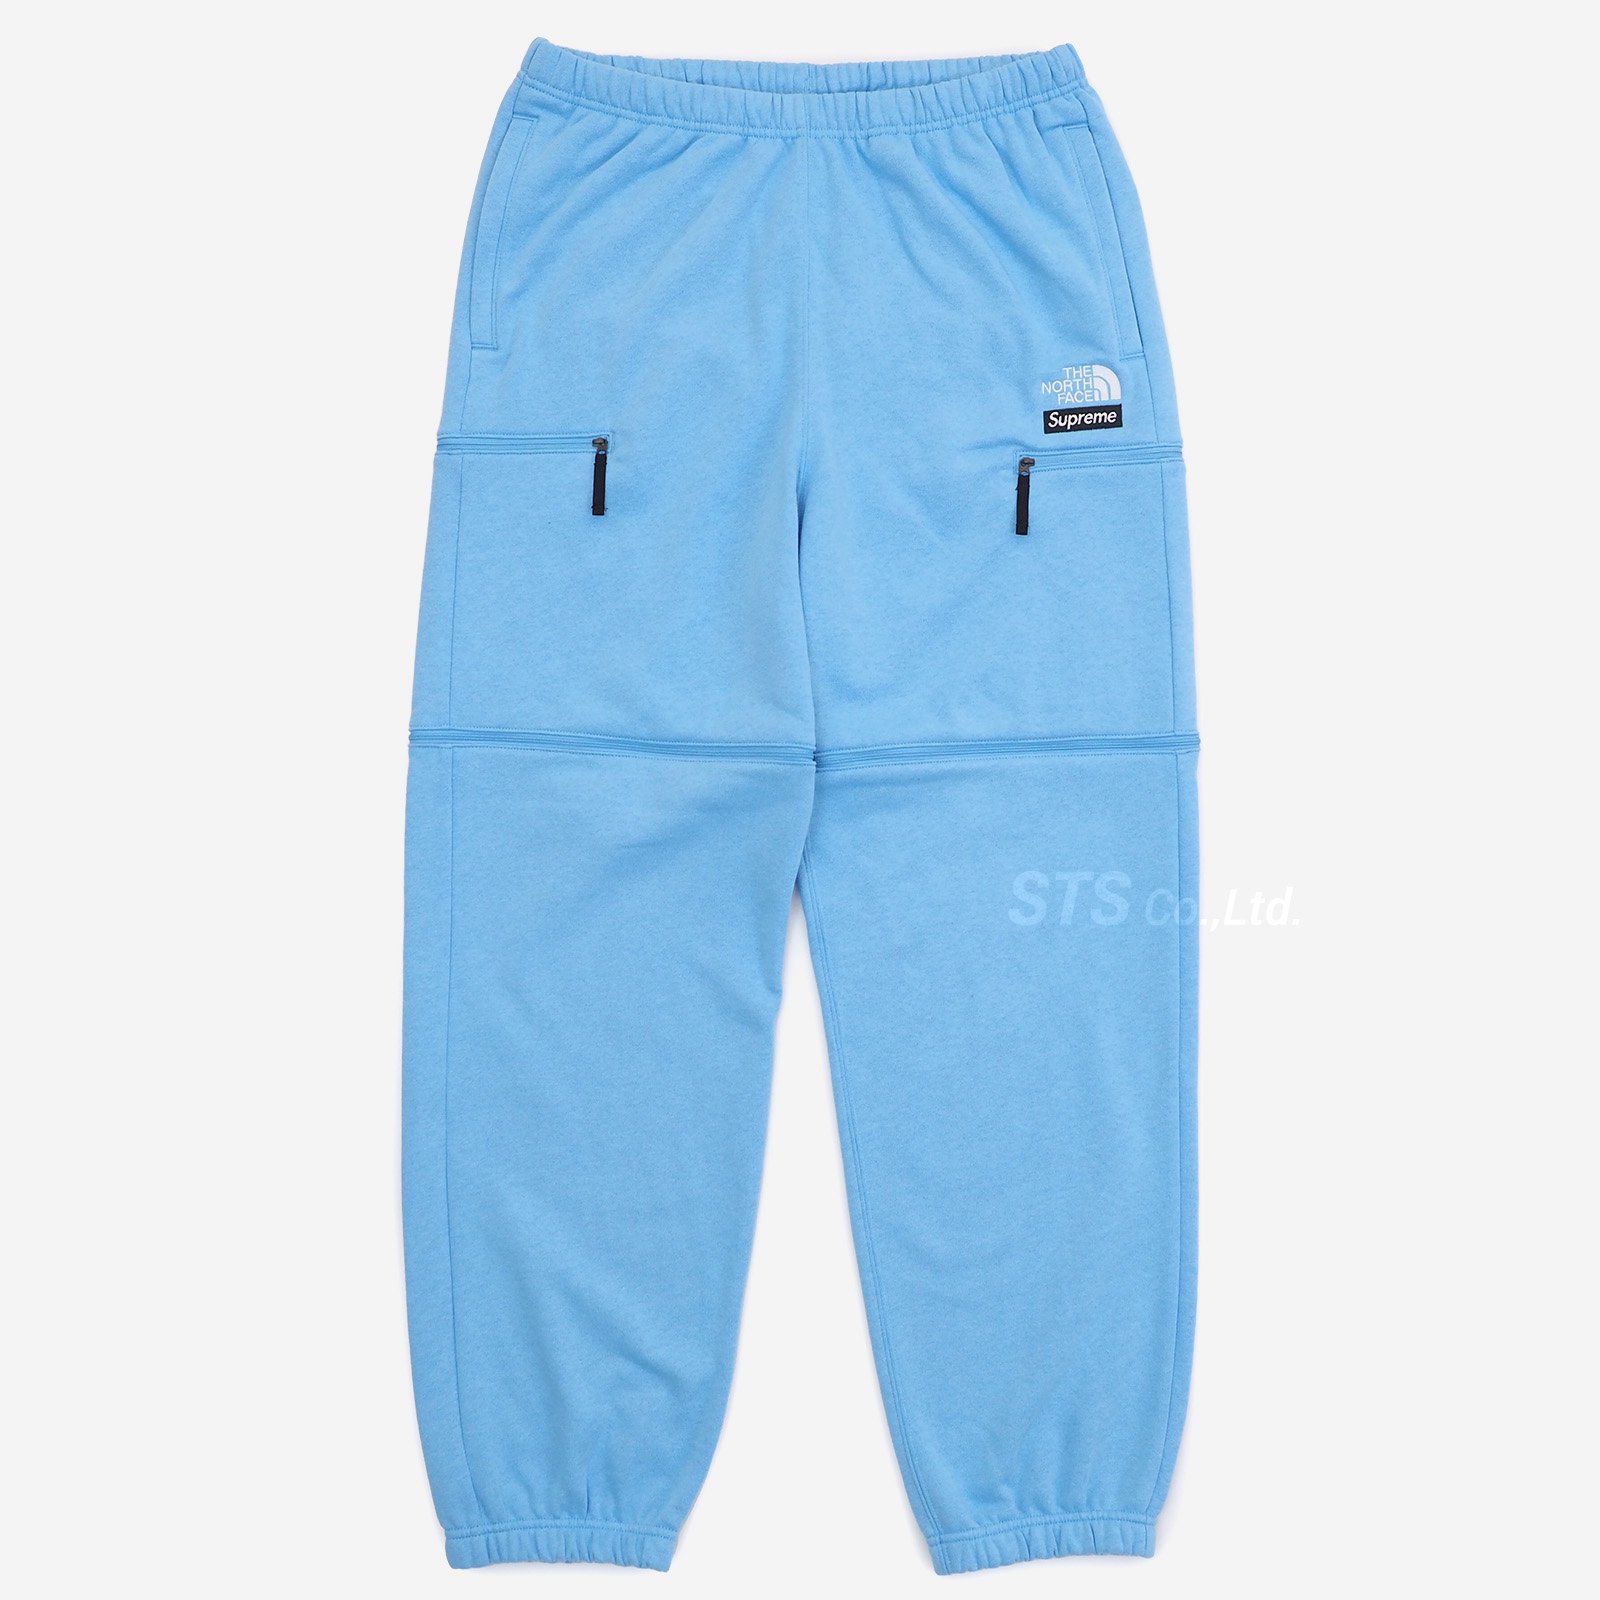 Supreme/The North Face Convertible Sweatpant - ParkSIDER